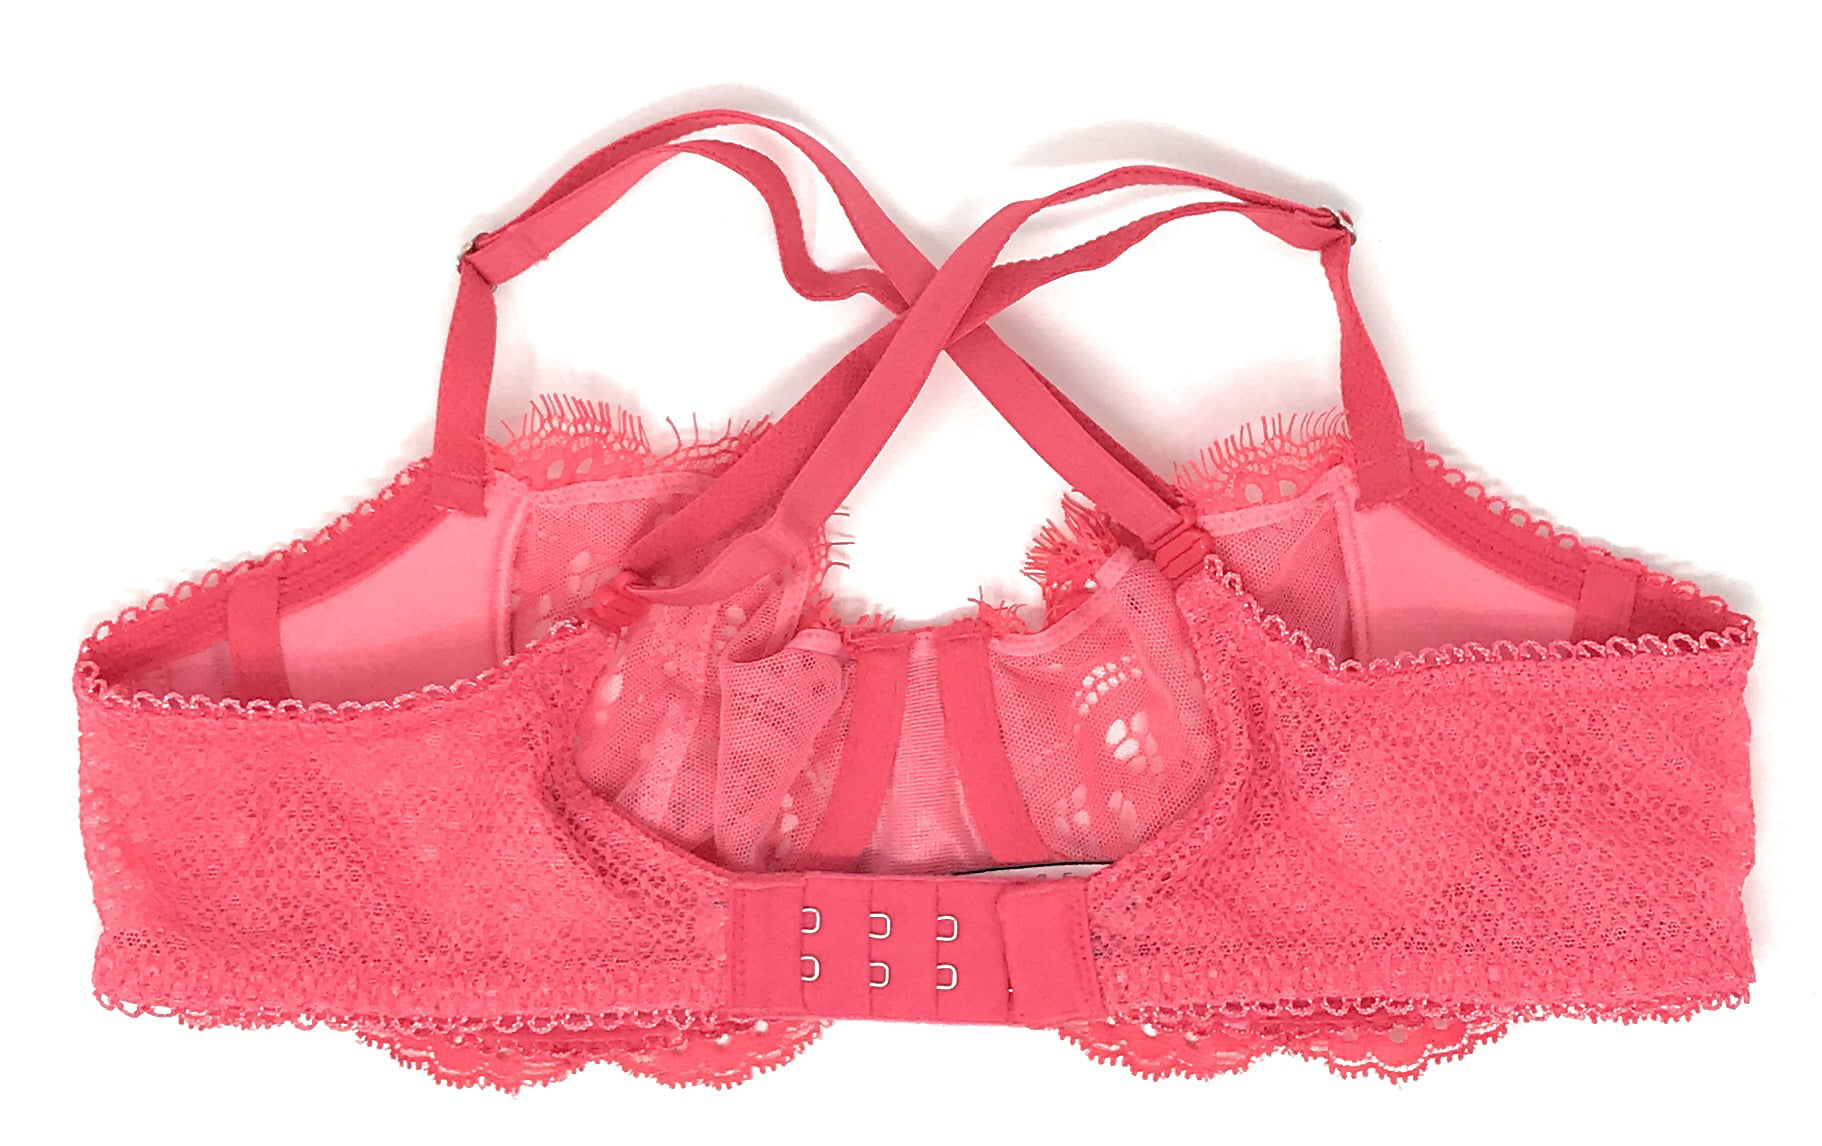 Victoria's Secret on X: Bra fact: Can you believe our Dream Angels Wicked  Balconette provides a perfect lift without *any* padding? The cups feature  an innovative sling to provide that oomph—all in